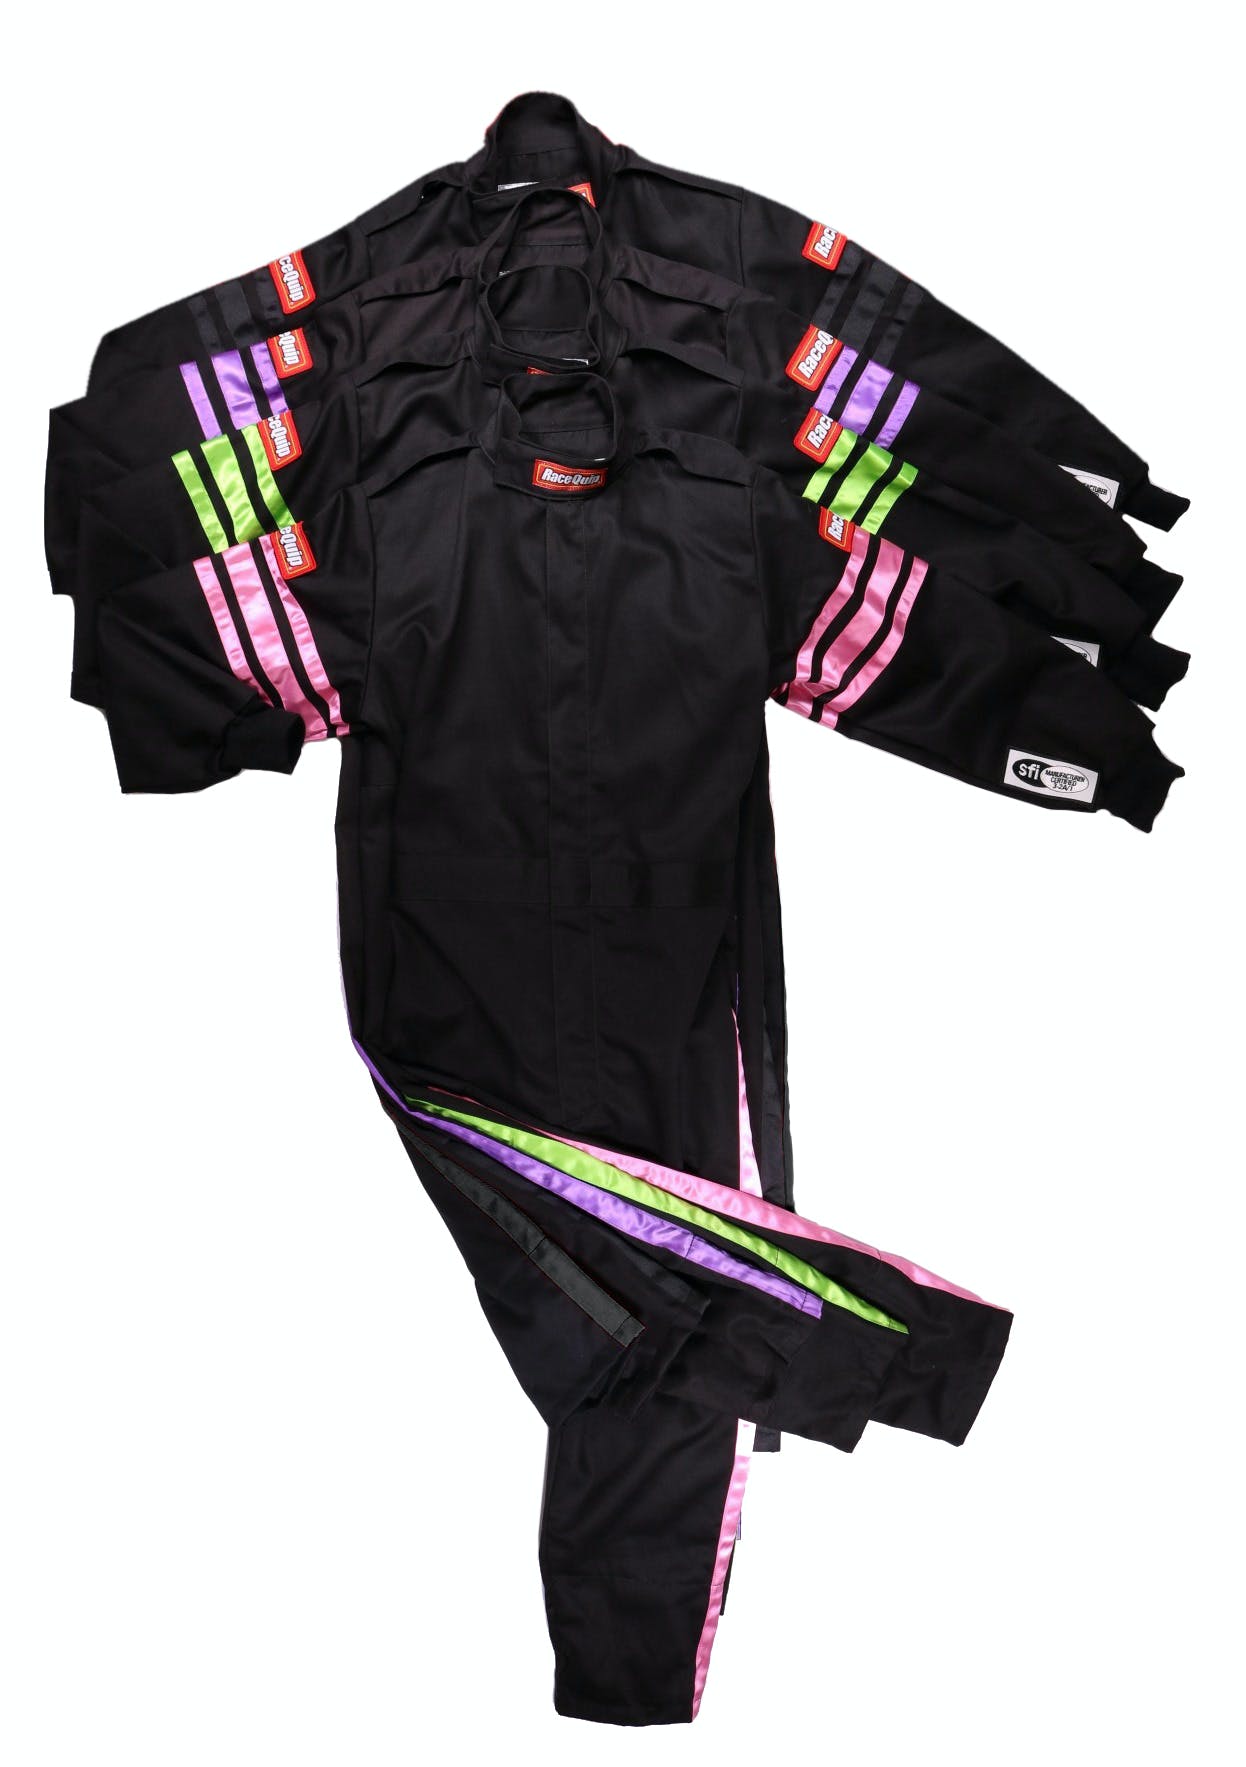 RaceQuip 1959995 SFI-1 Pyrovatex One-Piece Single-Layer Youth Racing Fire Suit (Black/Blue-L)